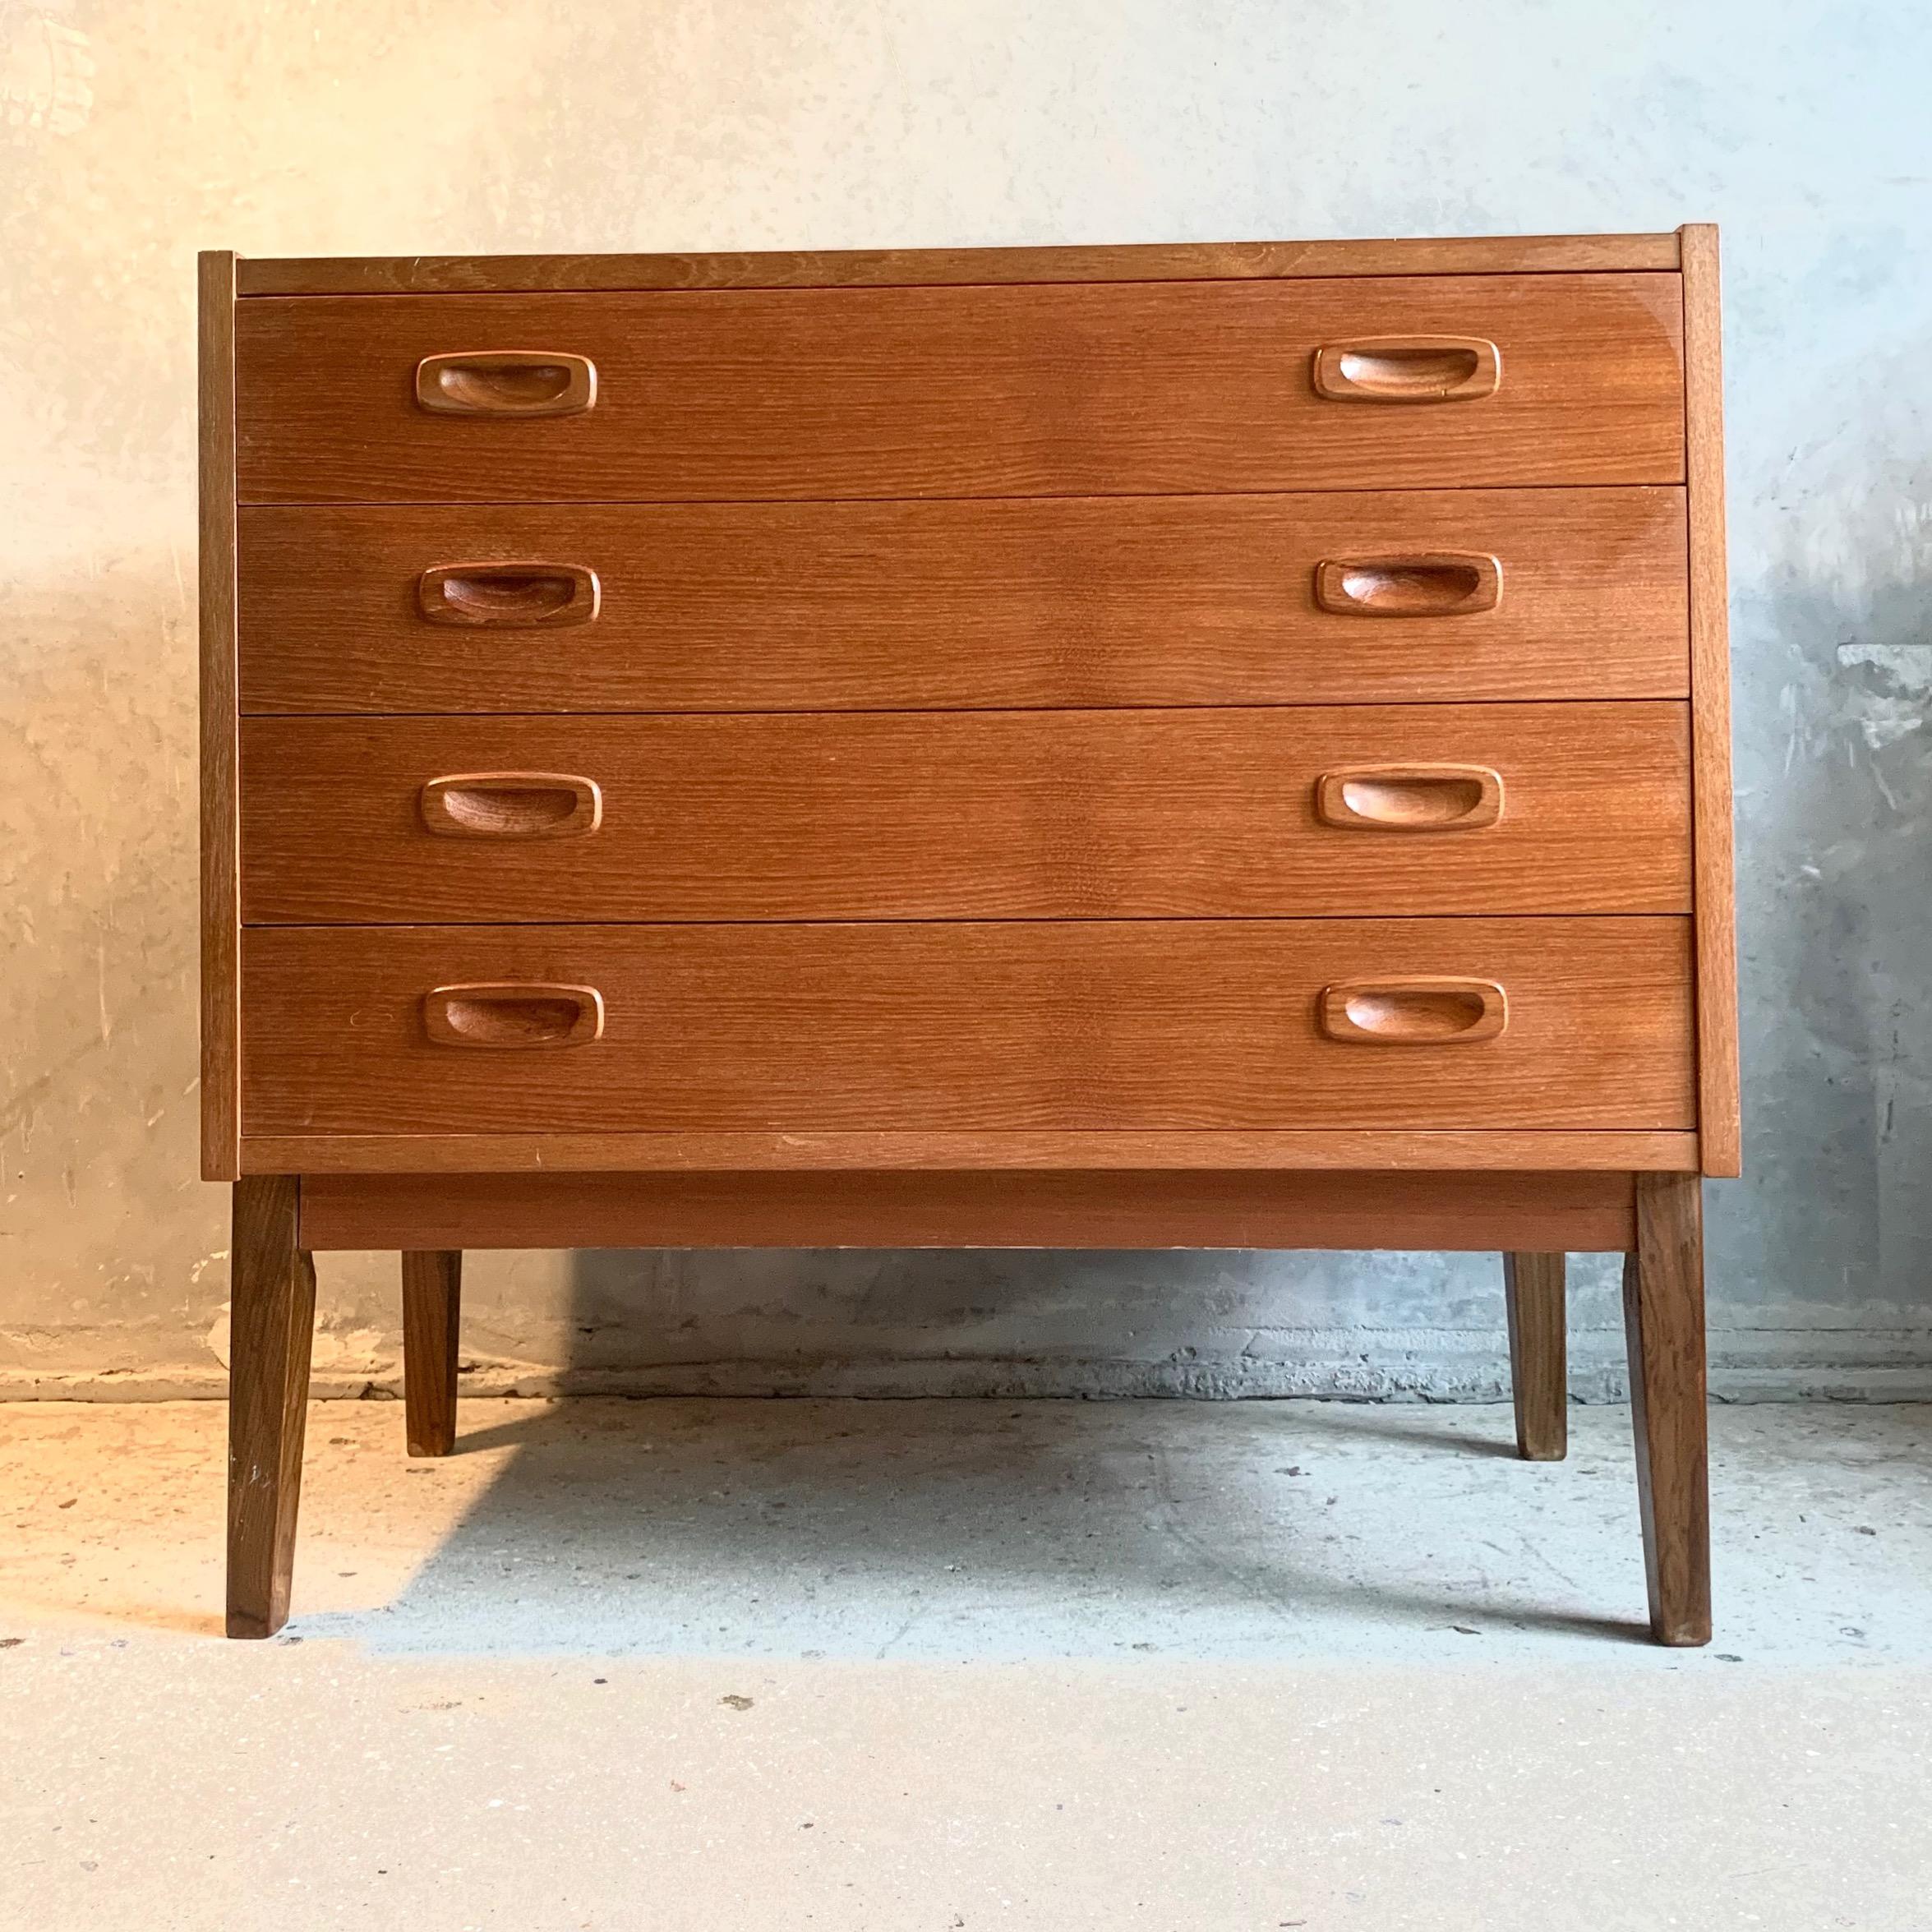 This midcentury teak dresser was produced in Denmark by PS Furniture Randers in the 1960s. It is in good vintage condition and features four drawers, tapered legs, and curved handles. The model is B 330.